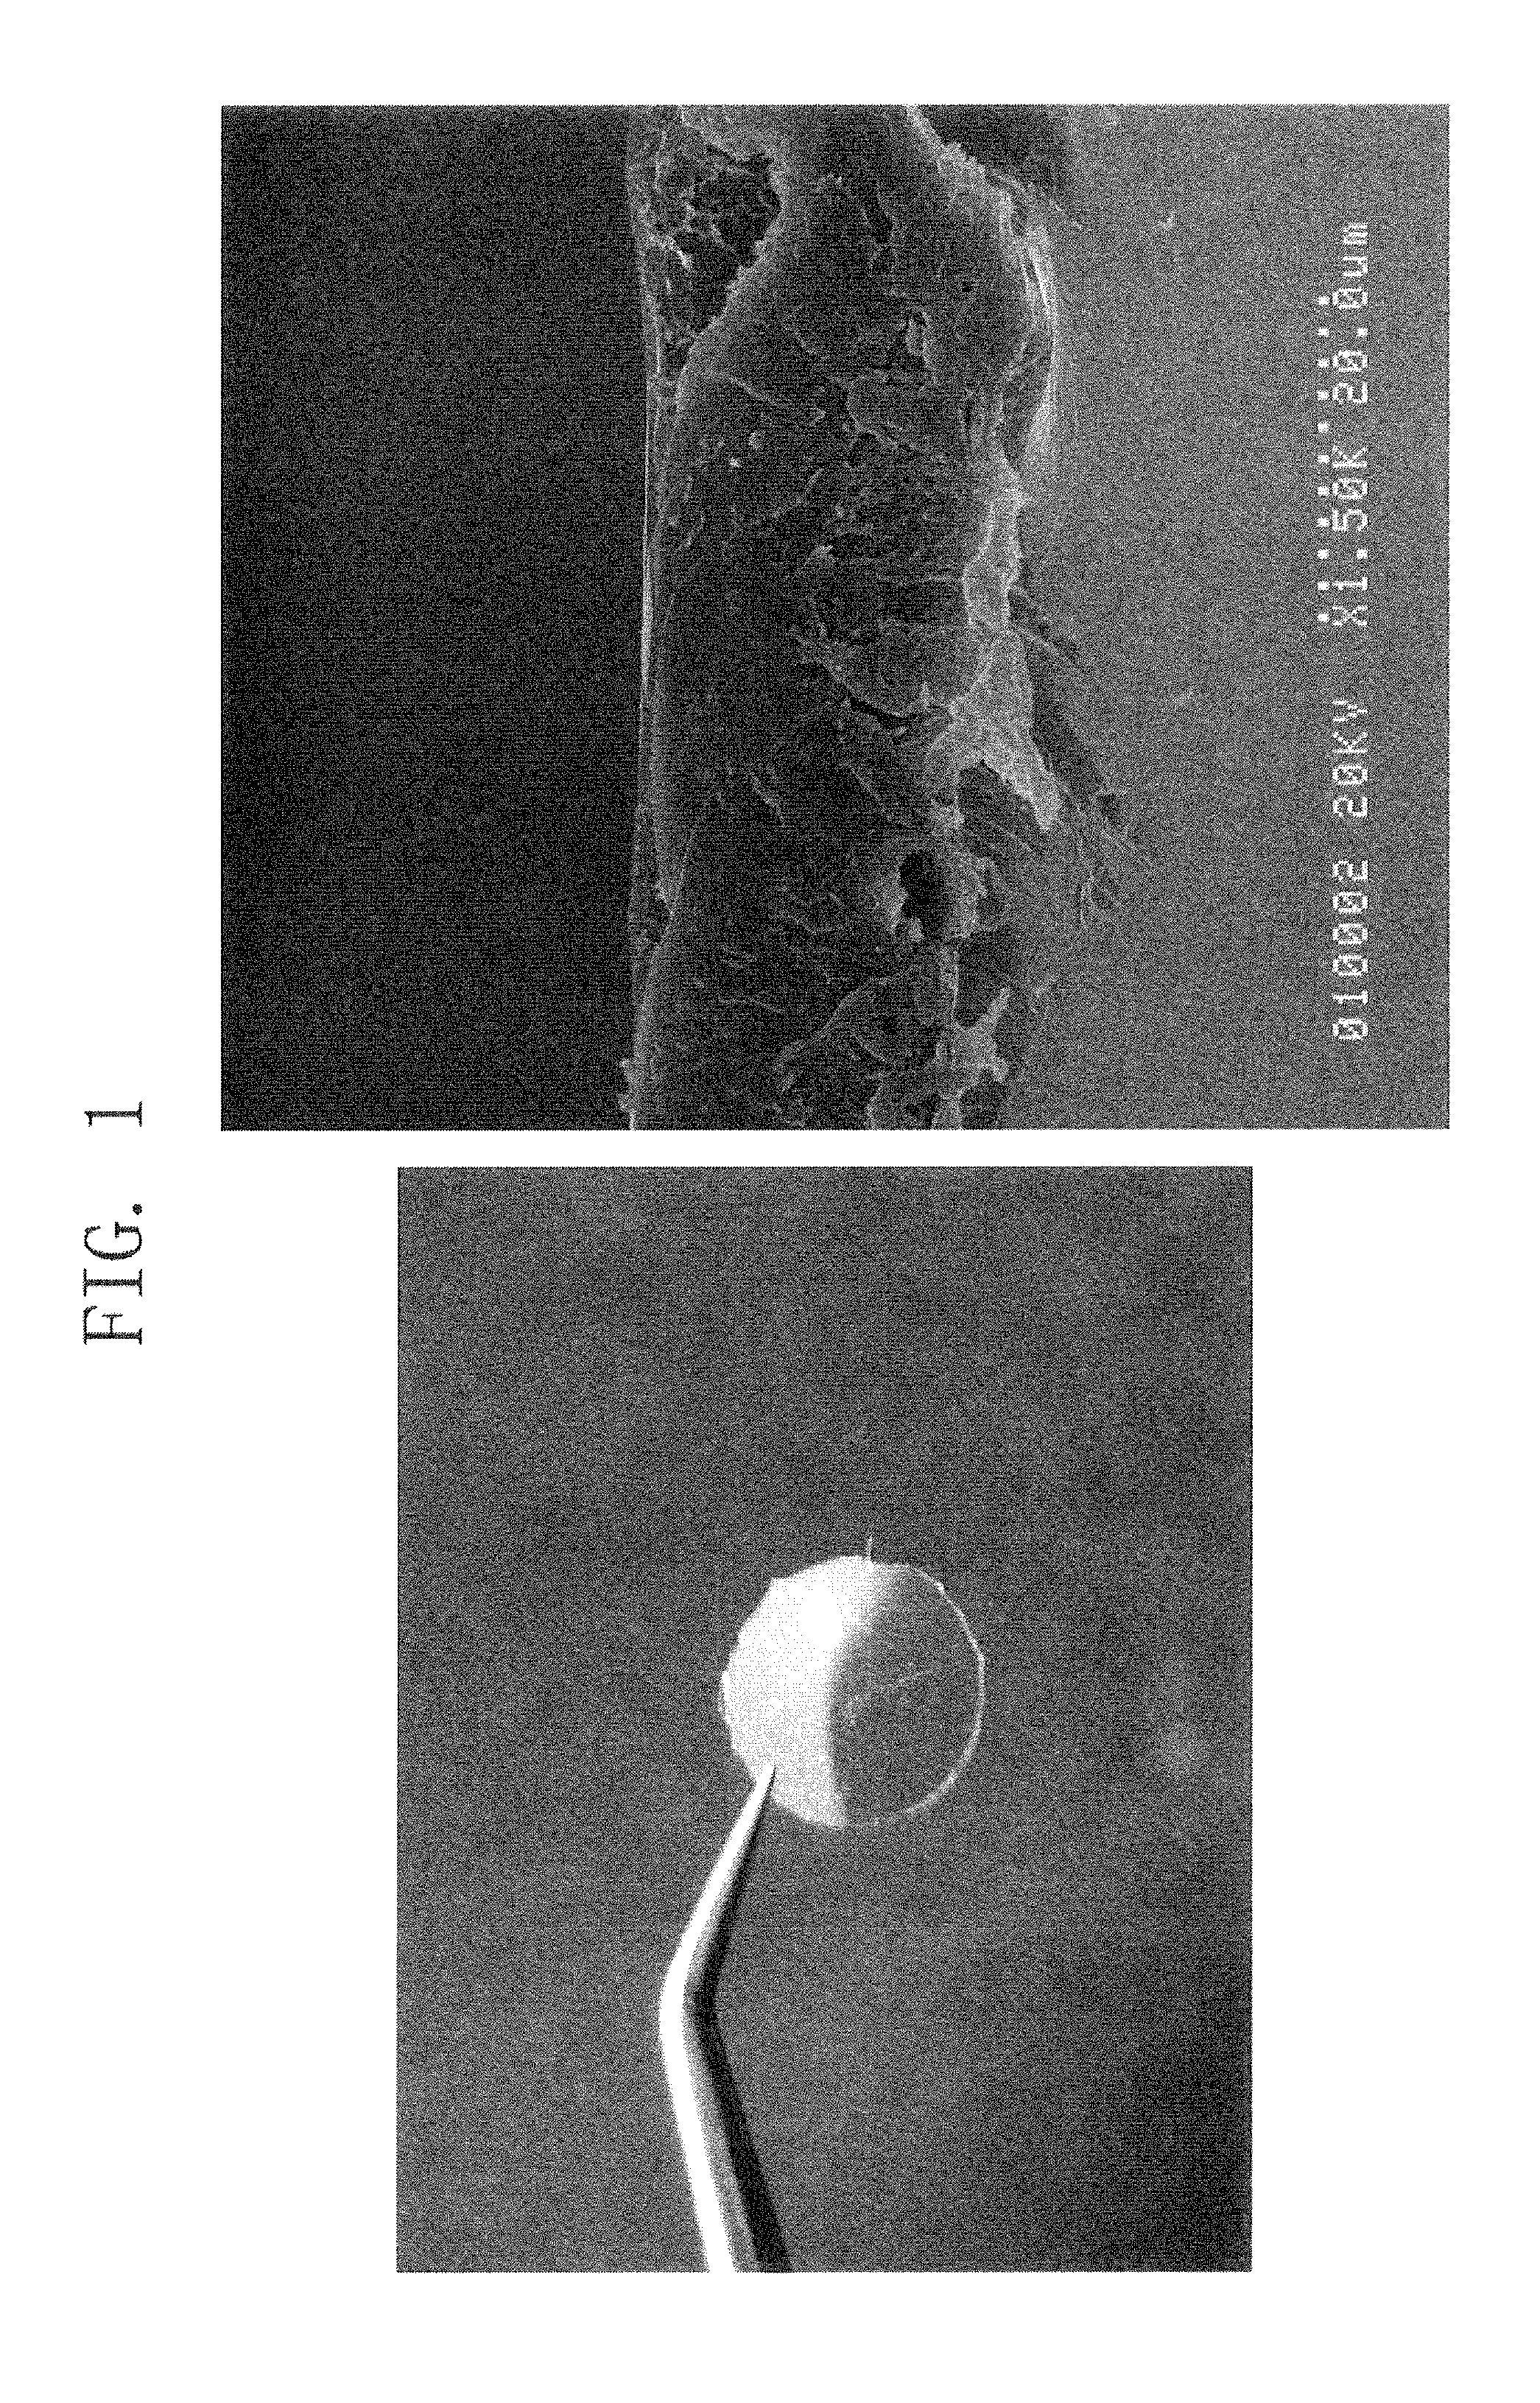 Artificial eardrum using silk protein and method of fabricating the same